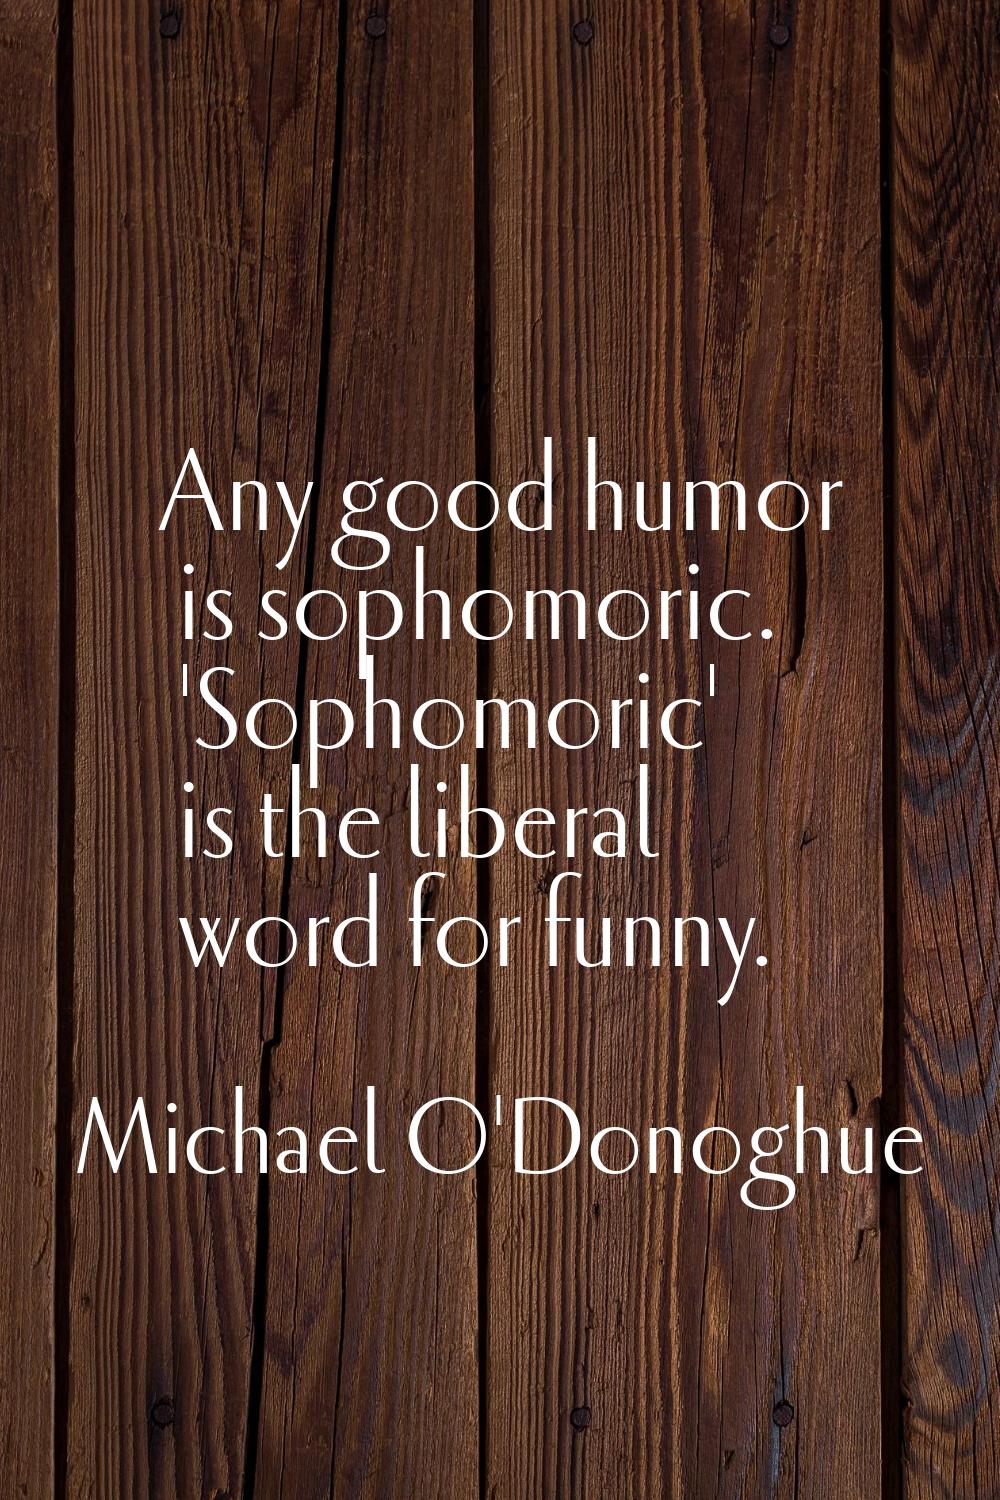 Any good humor is sophomoric. 'Sophomoric' is the liberal word for funny.